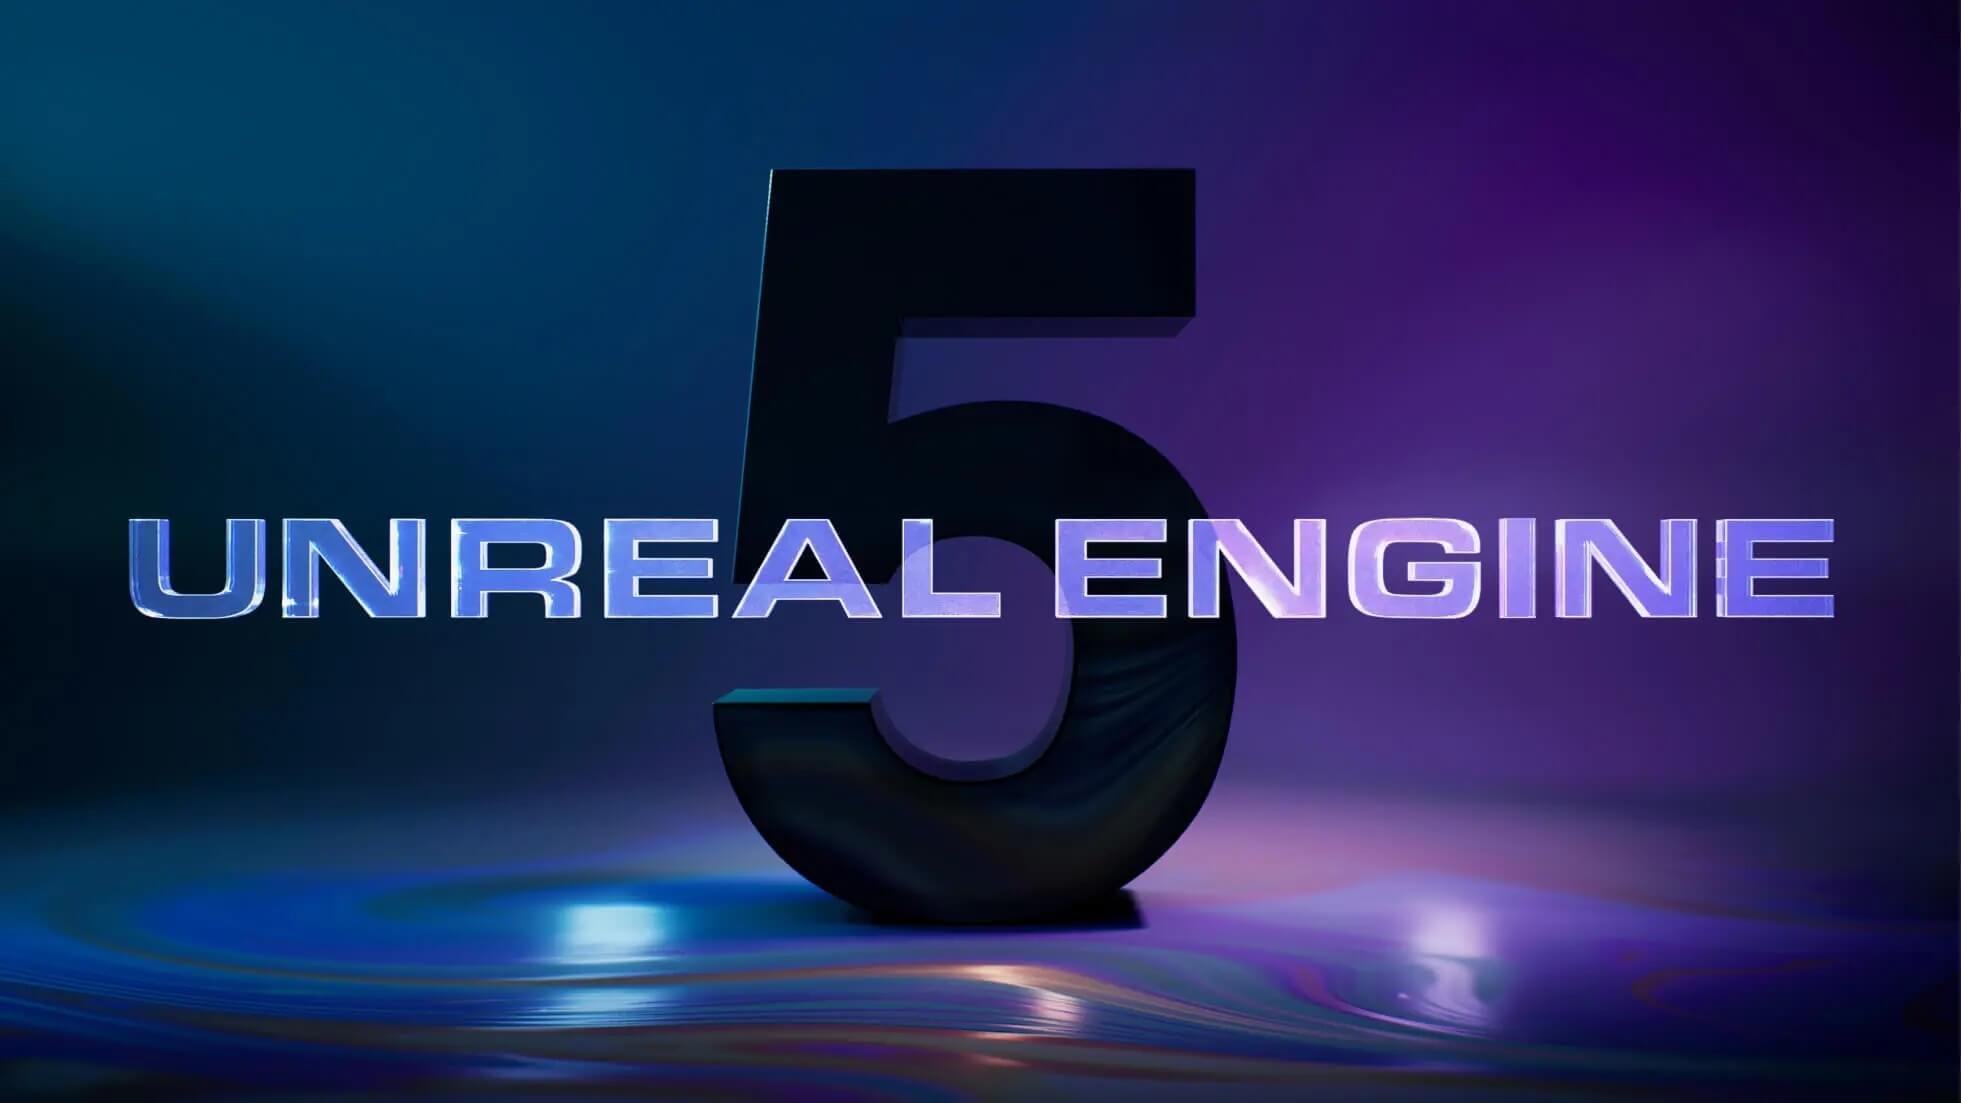 Unreal Engine 5.2 Release Notes  Unreal Engine 5.2 Documentation